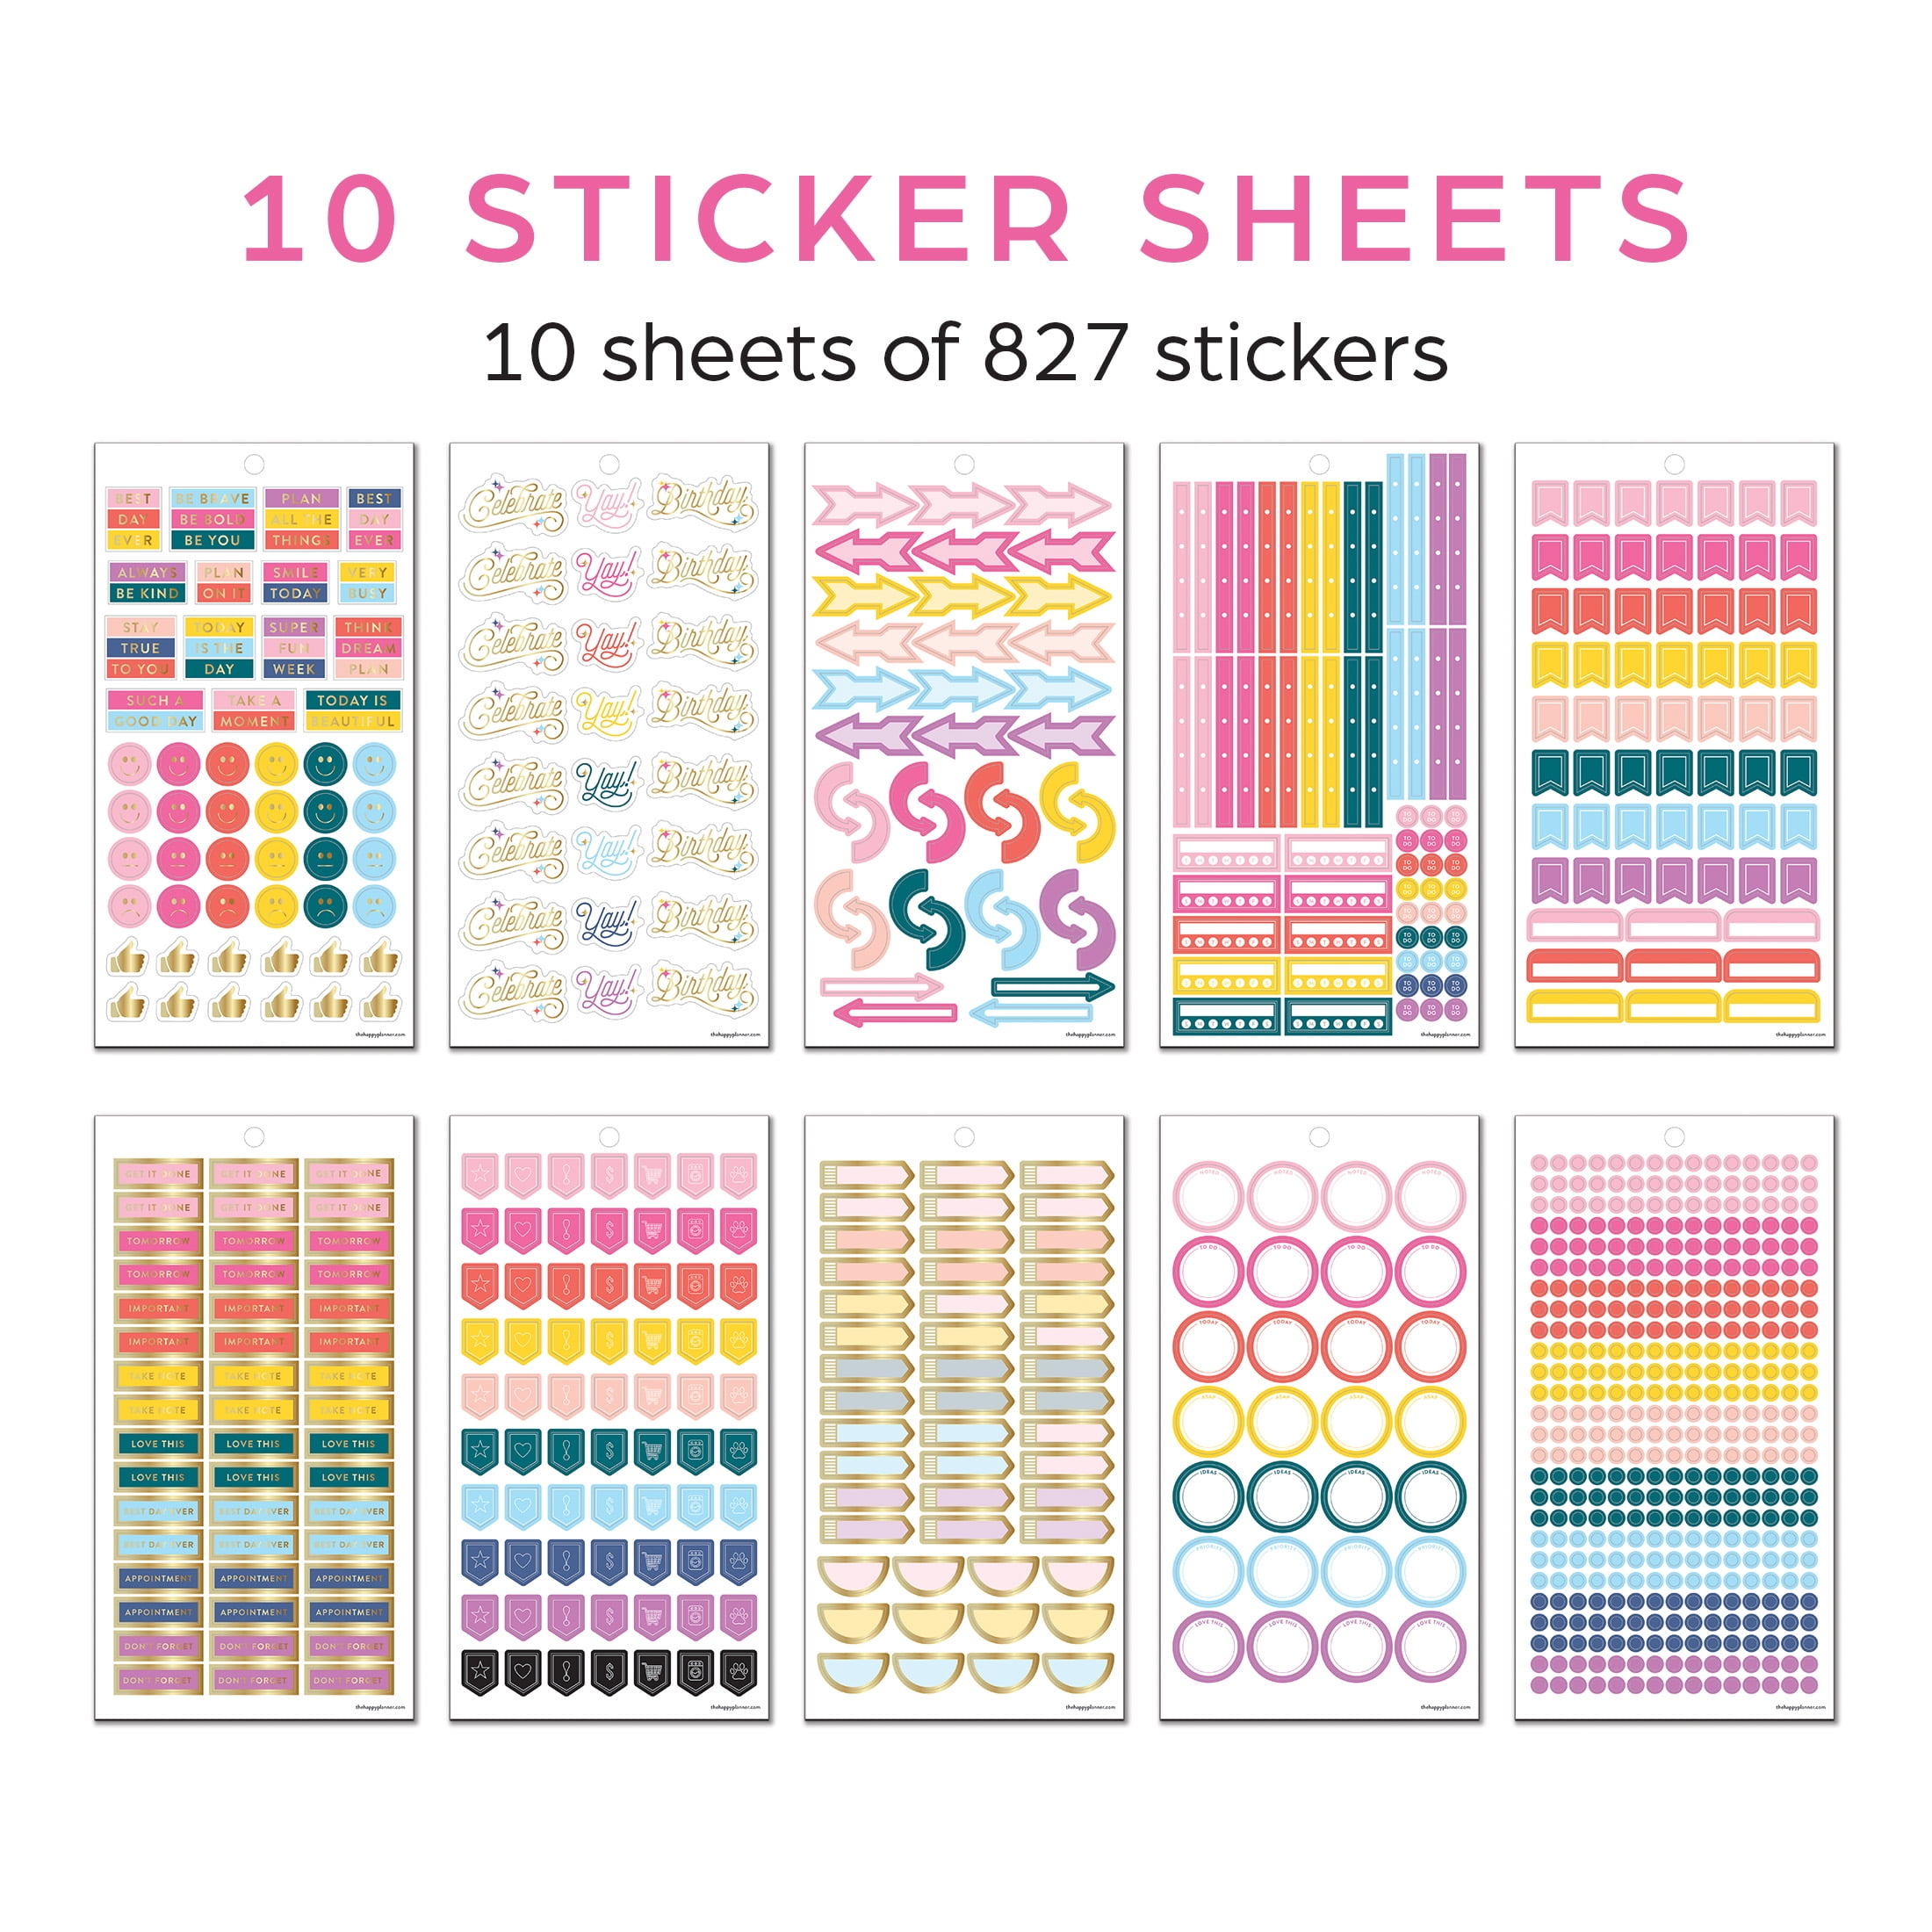 Pack of 10 Sticker Sheets, Colorful Sticker Sheet, Kindness Stickers,  Bright Sticker Sheet, Encouraging Labels, Girly Stickers, Planner 